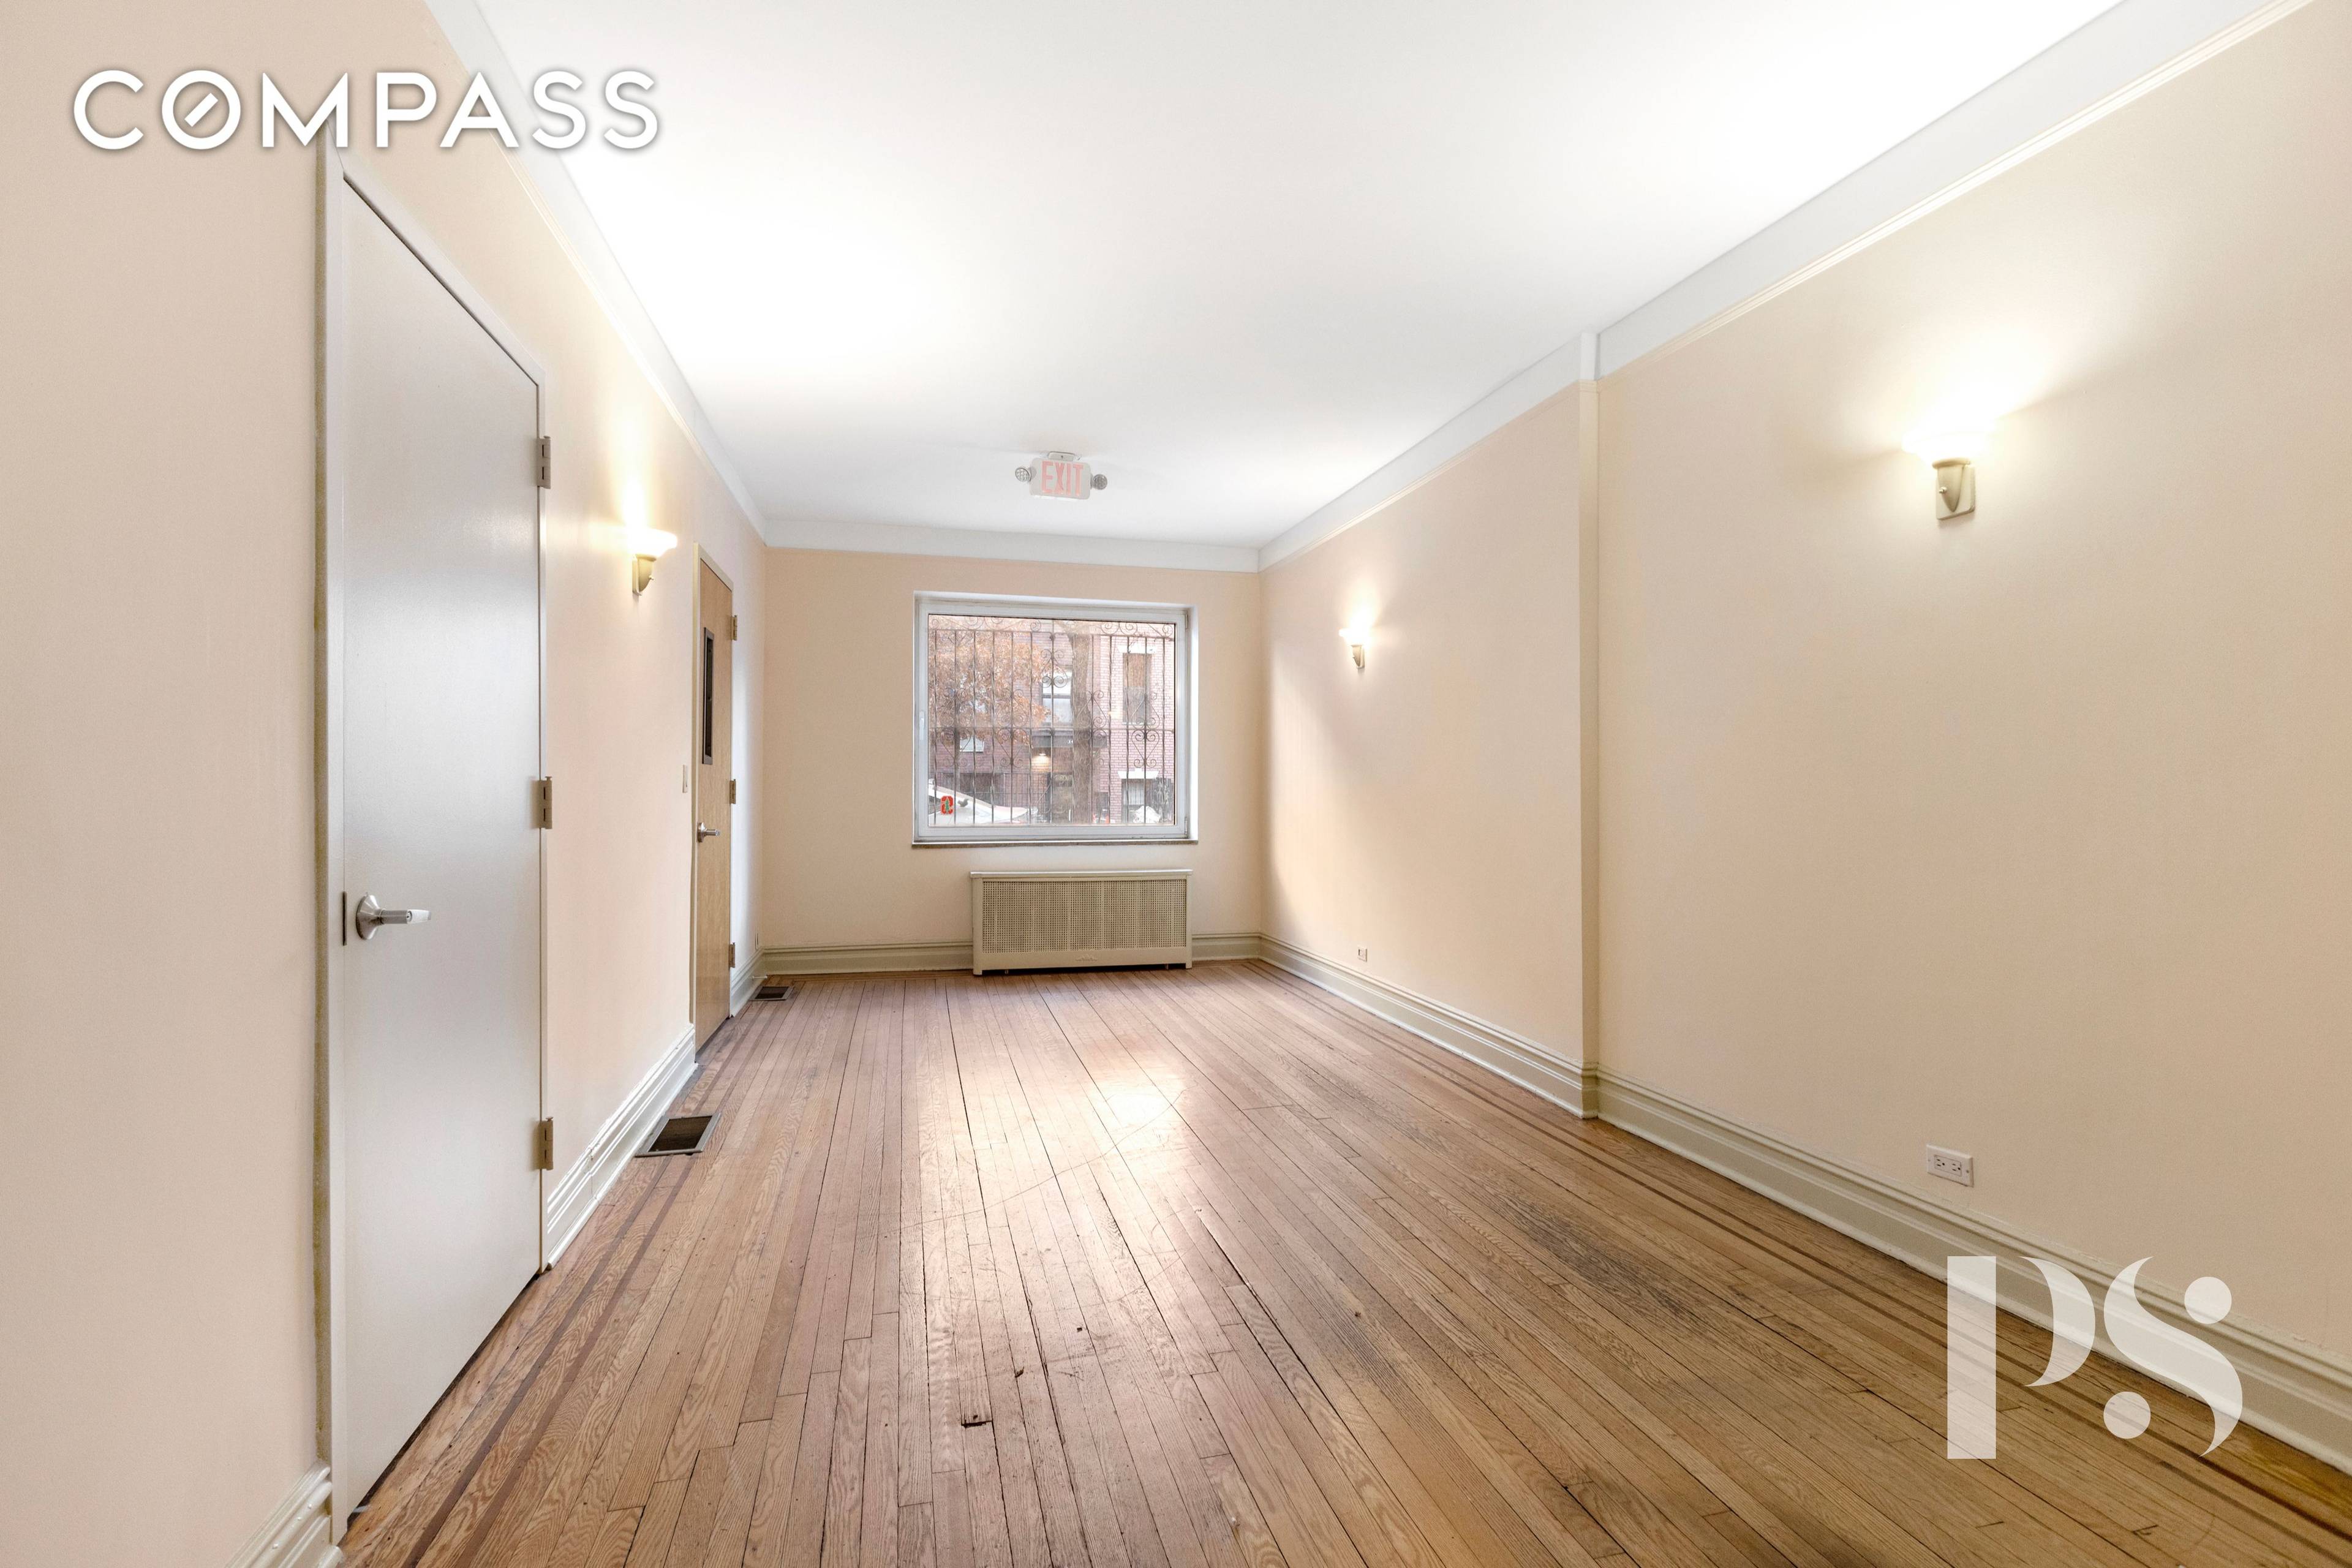 This sizable office space is available for lease in Kips Bay.